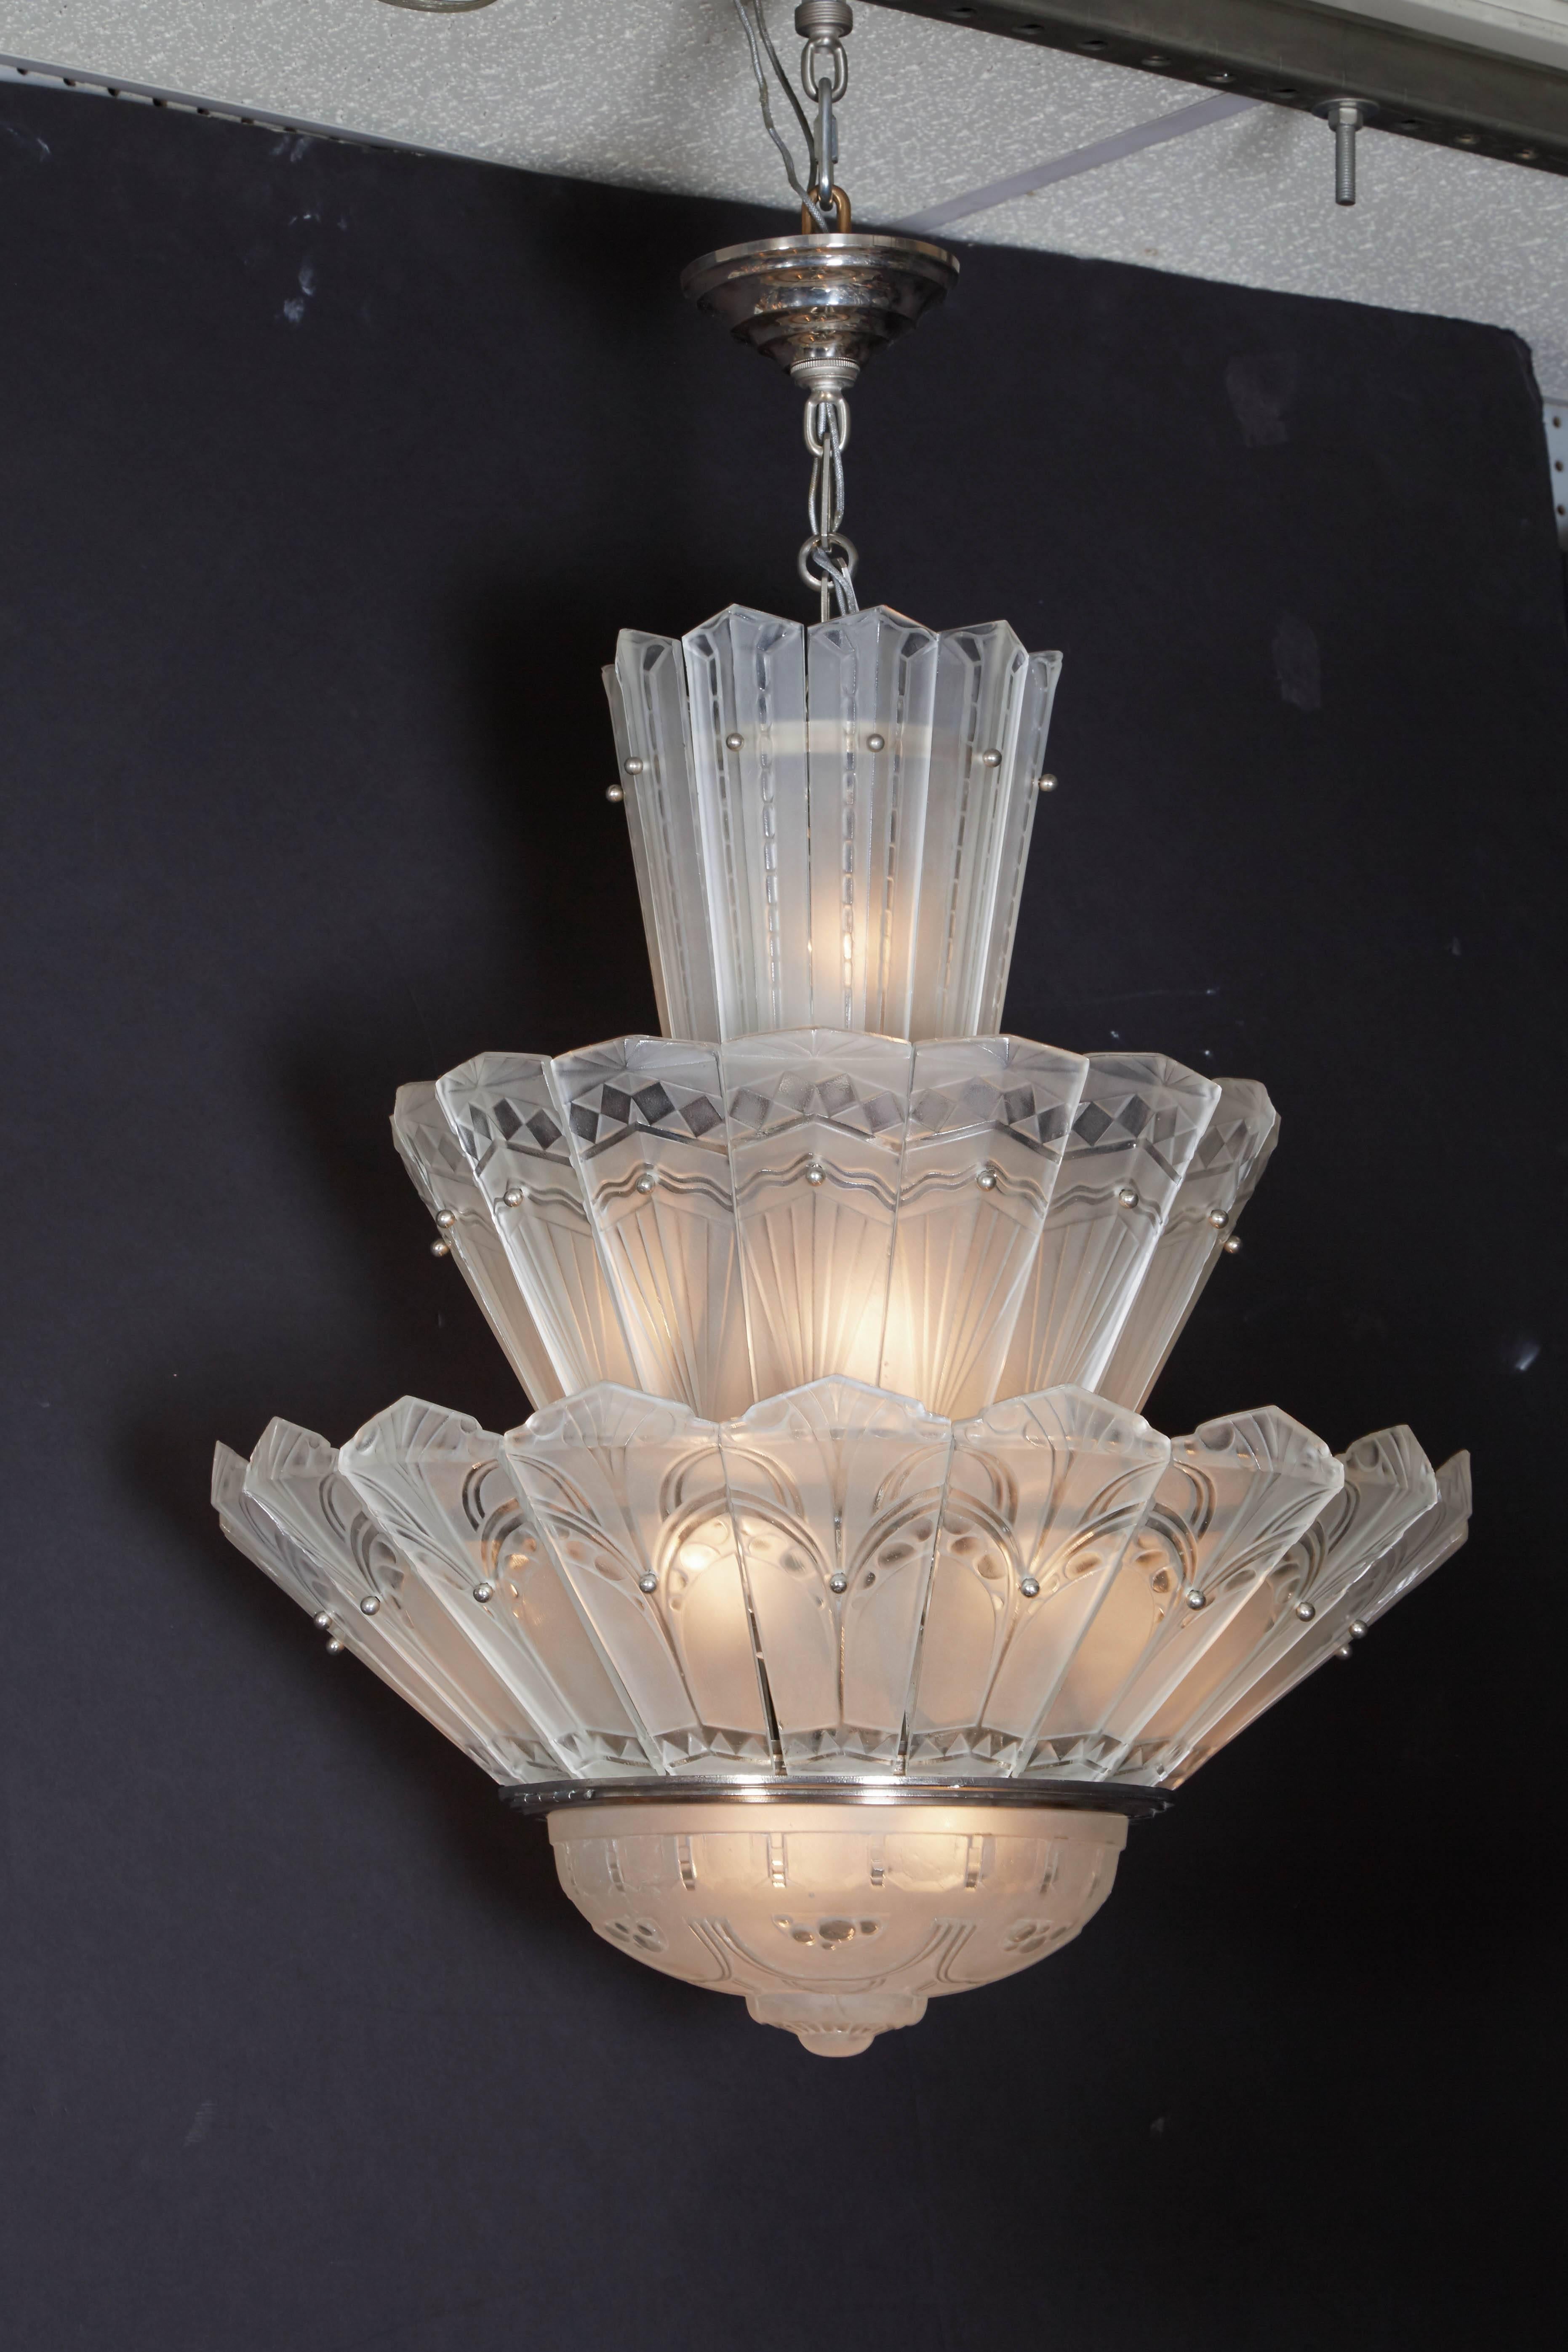 Fine and rare French Art Deco three-tier waterfall chandelier by Sabino. 
Forty-three frosted and polished molded art glass panels plus central coupe feature intentionally notable varied geometric patterns that decorate each tier. Polished nickeled